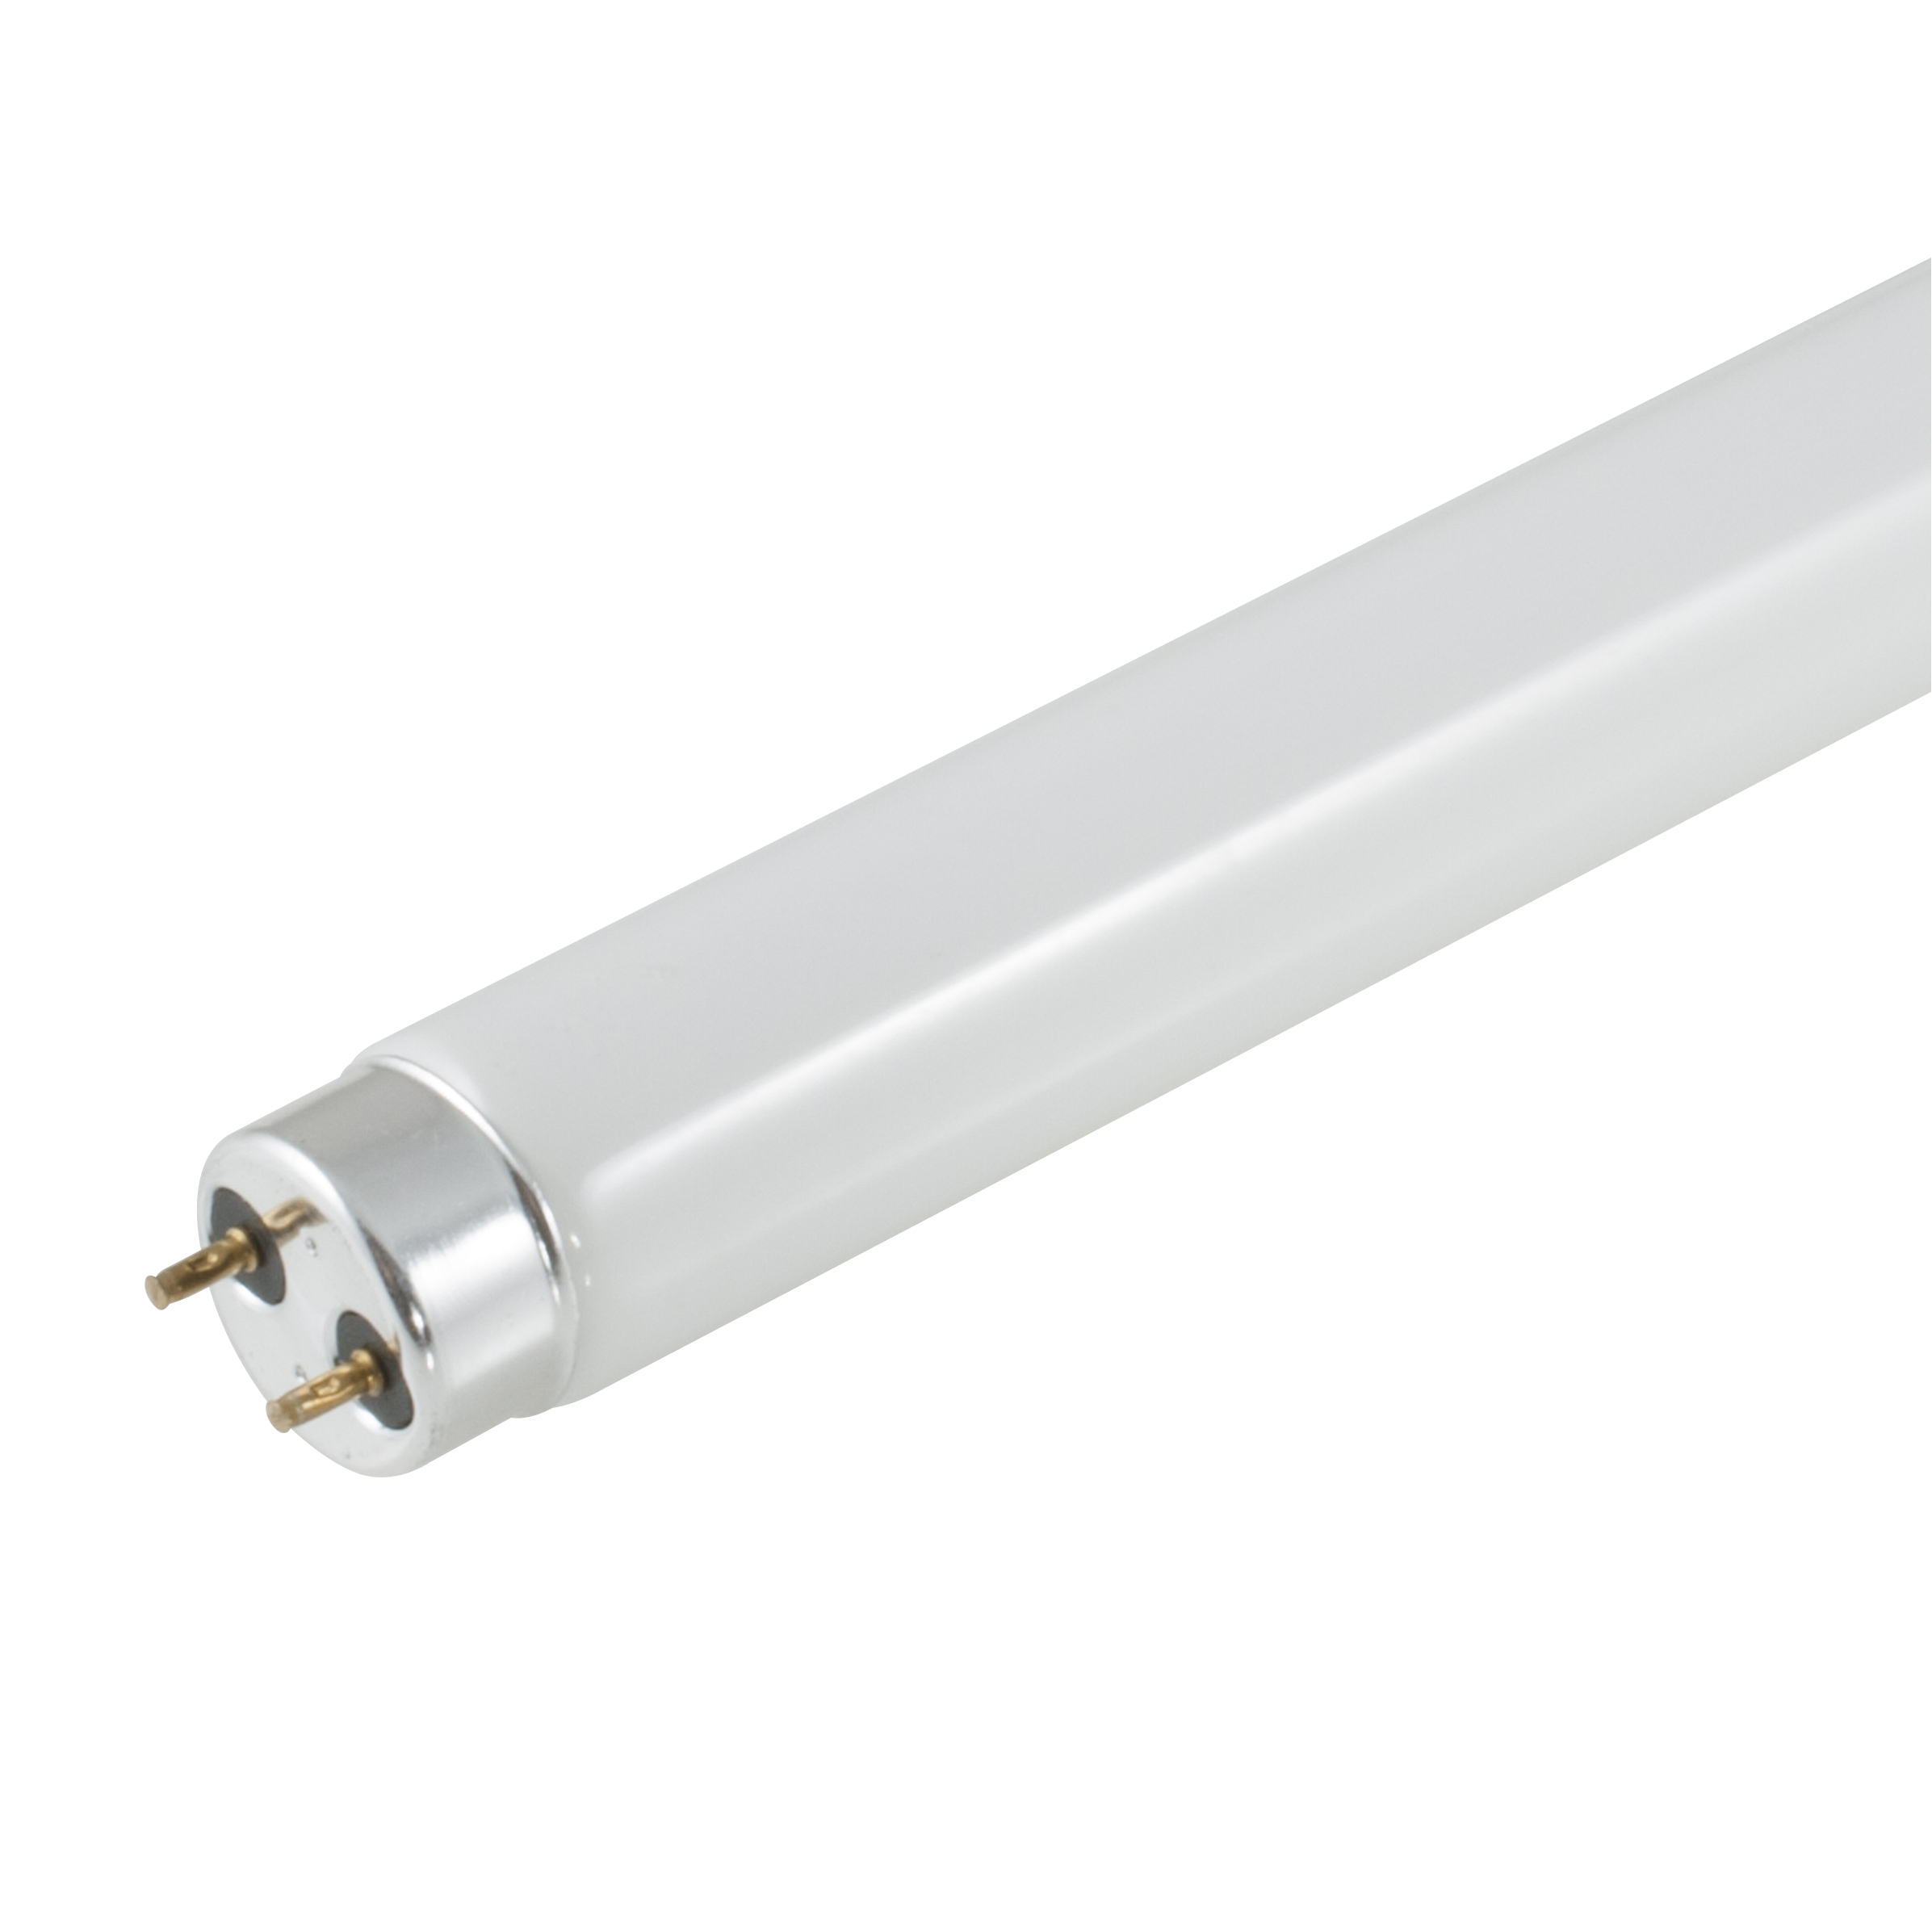 25x COOL WHITE BRANDED T8 FLUORESCENT TUBES 2ft 4ft 5ft 6ft 18w 30w 36w 58w 70w 